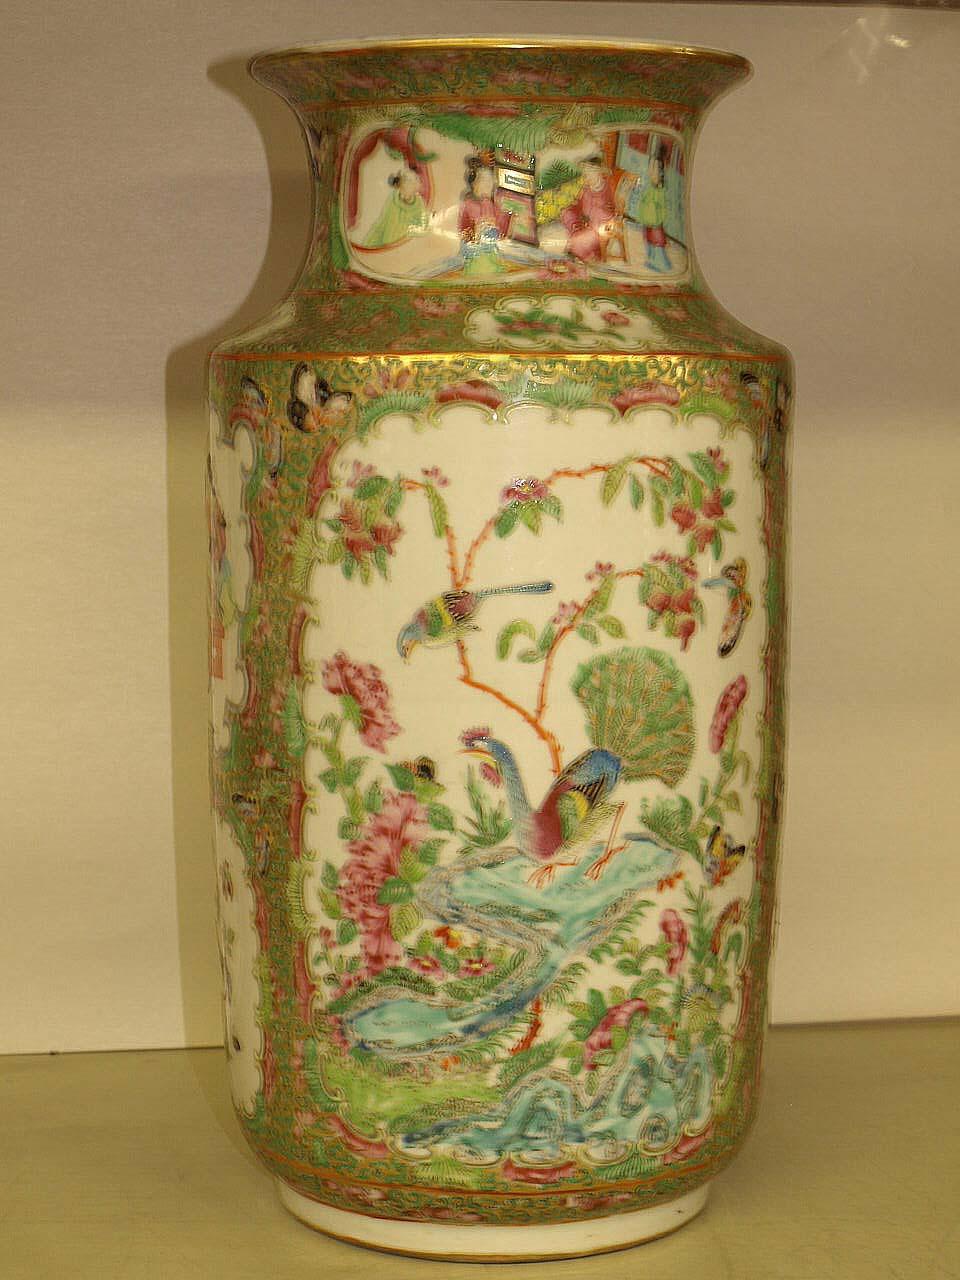 Rose mandarin vase, with a two large polychrome panels, one with birds and flowers, the other is an exterior scene depicting a multitude of female figures. These panels are flanked by two smaller panels also depicting birds, flowers and figures, in